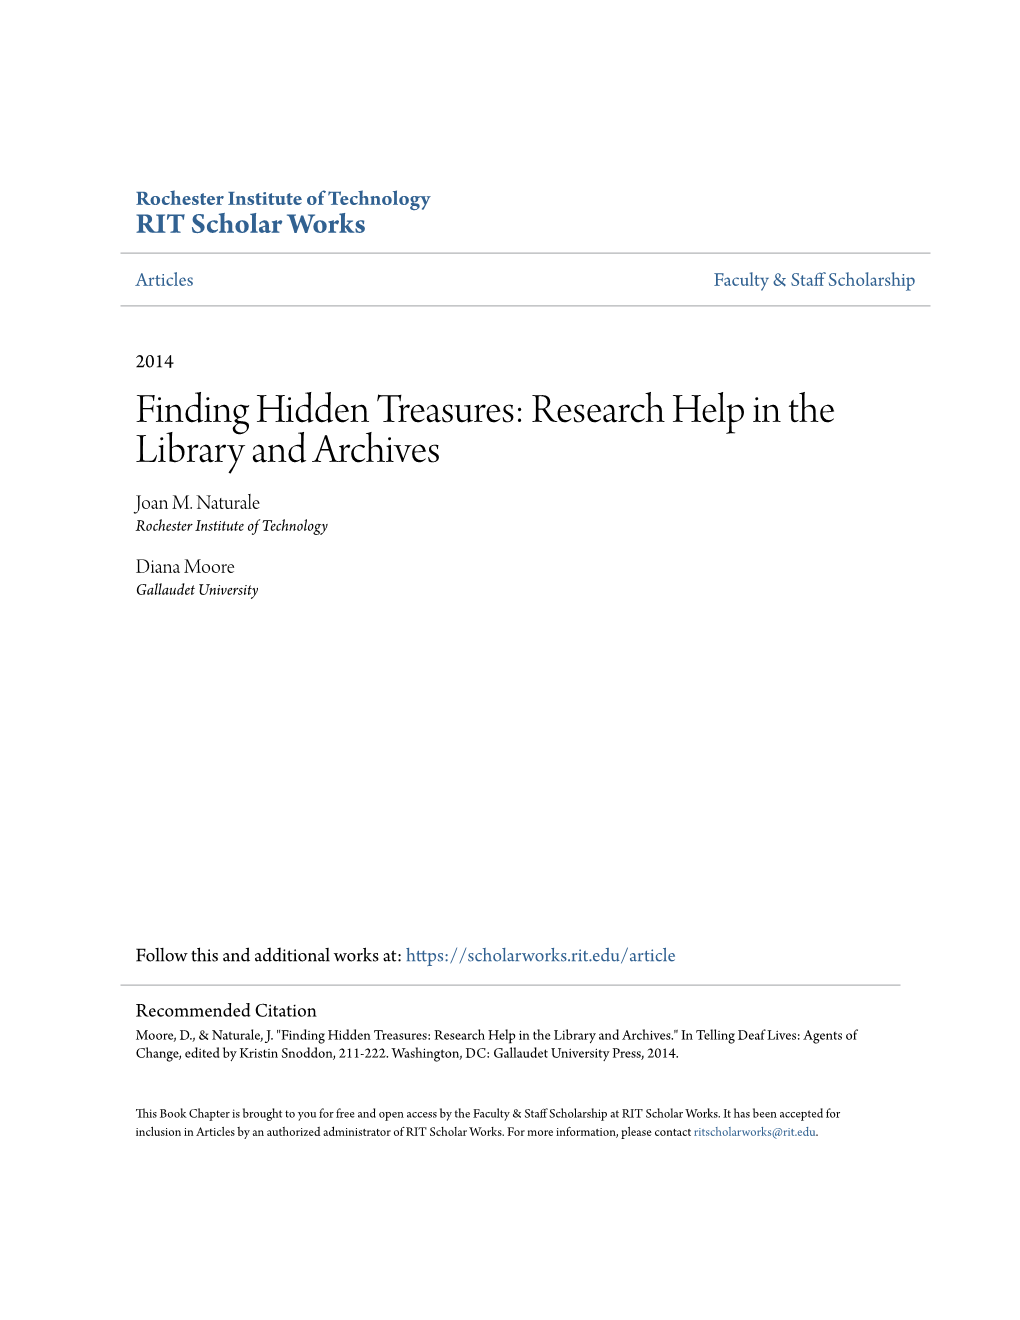 Finding Hidden Treasures: Research Help in the Library and Archives Joan M